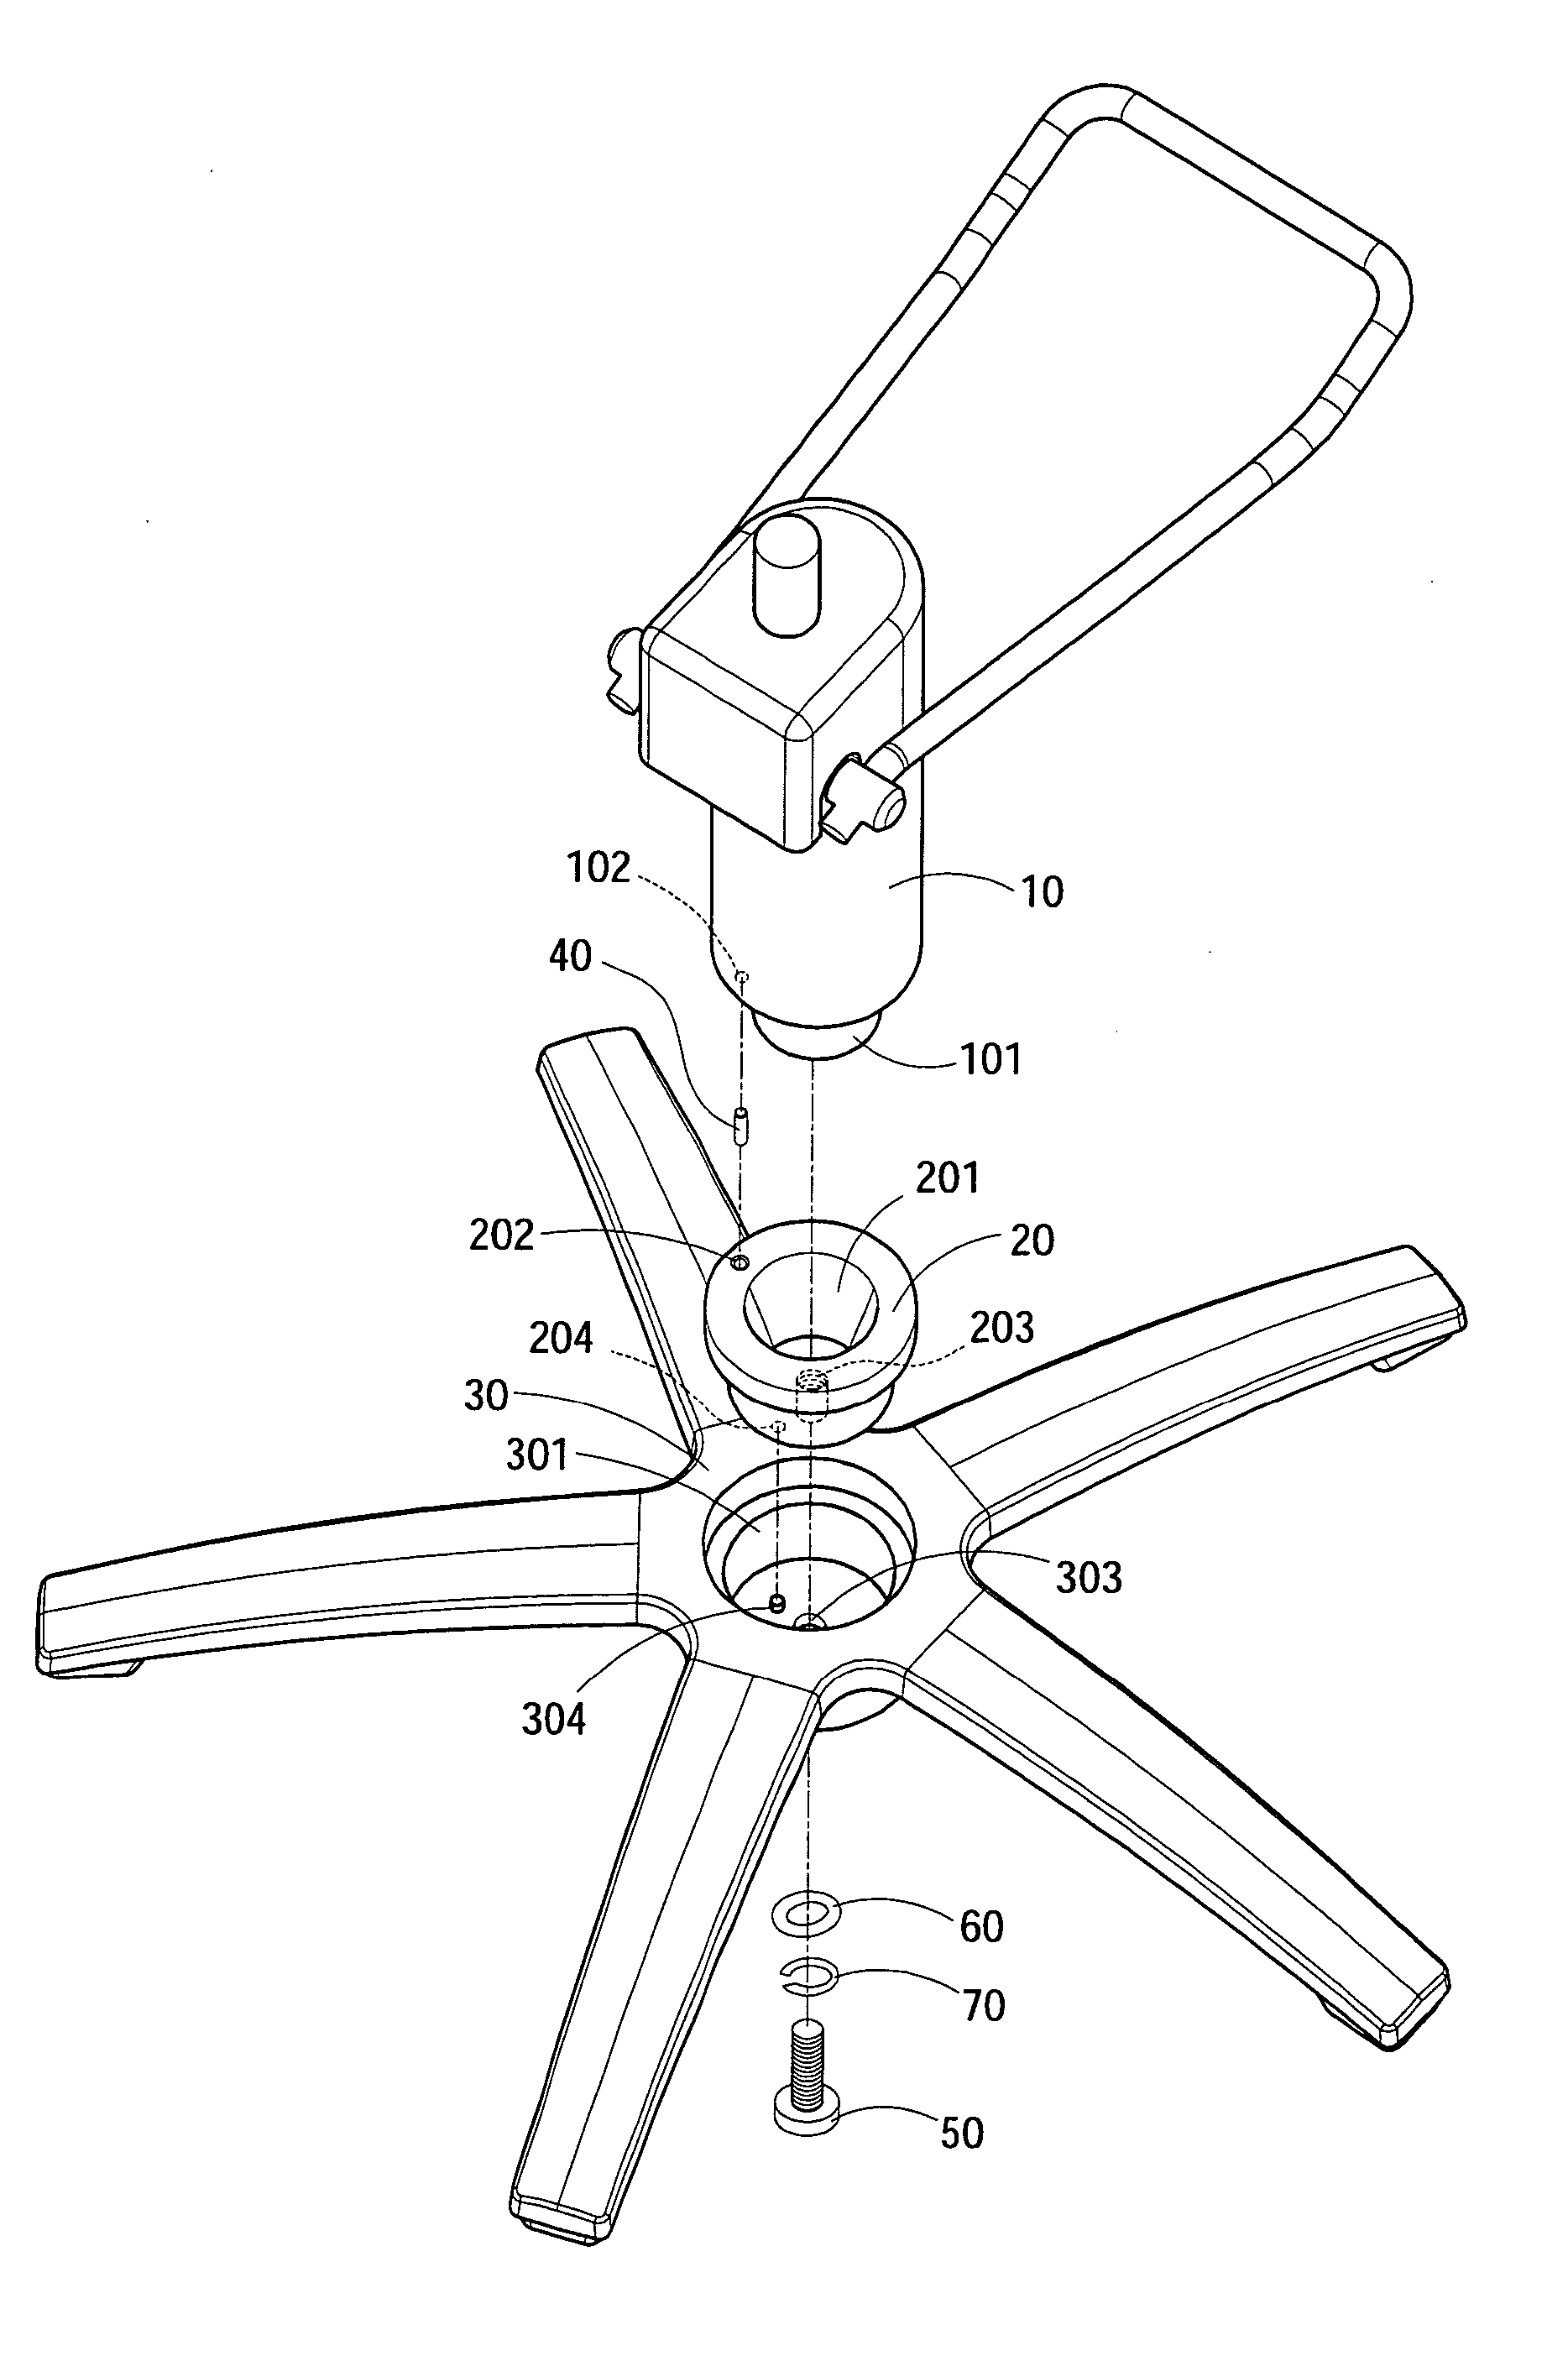 Base coupling structure of a height adjustable chair